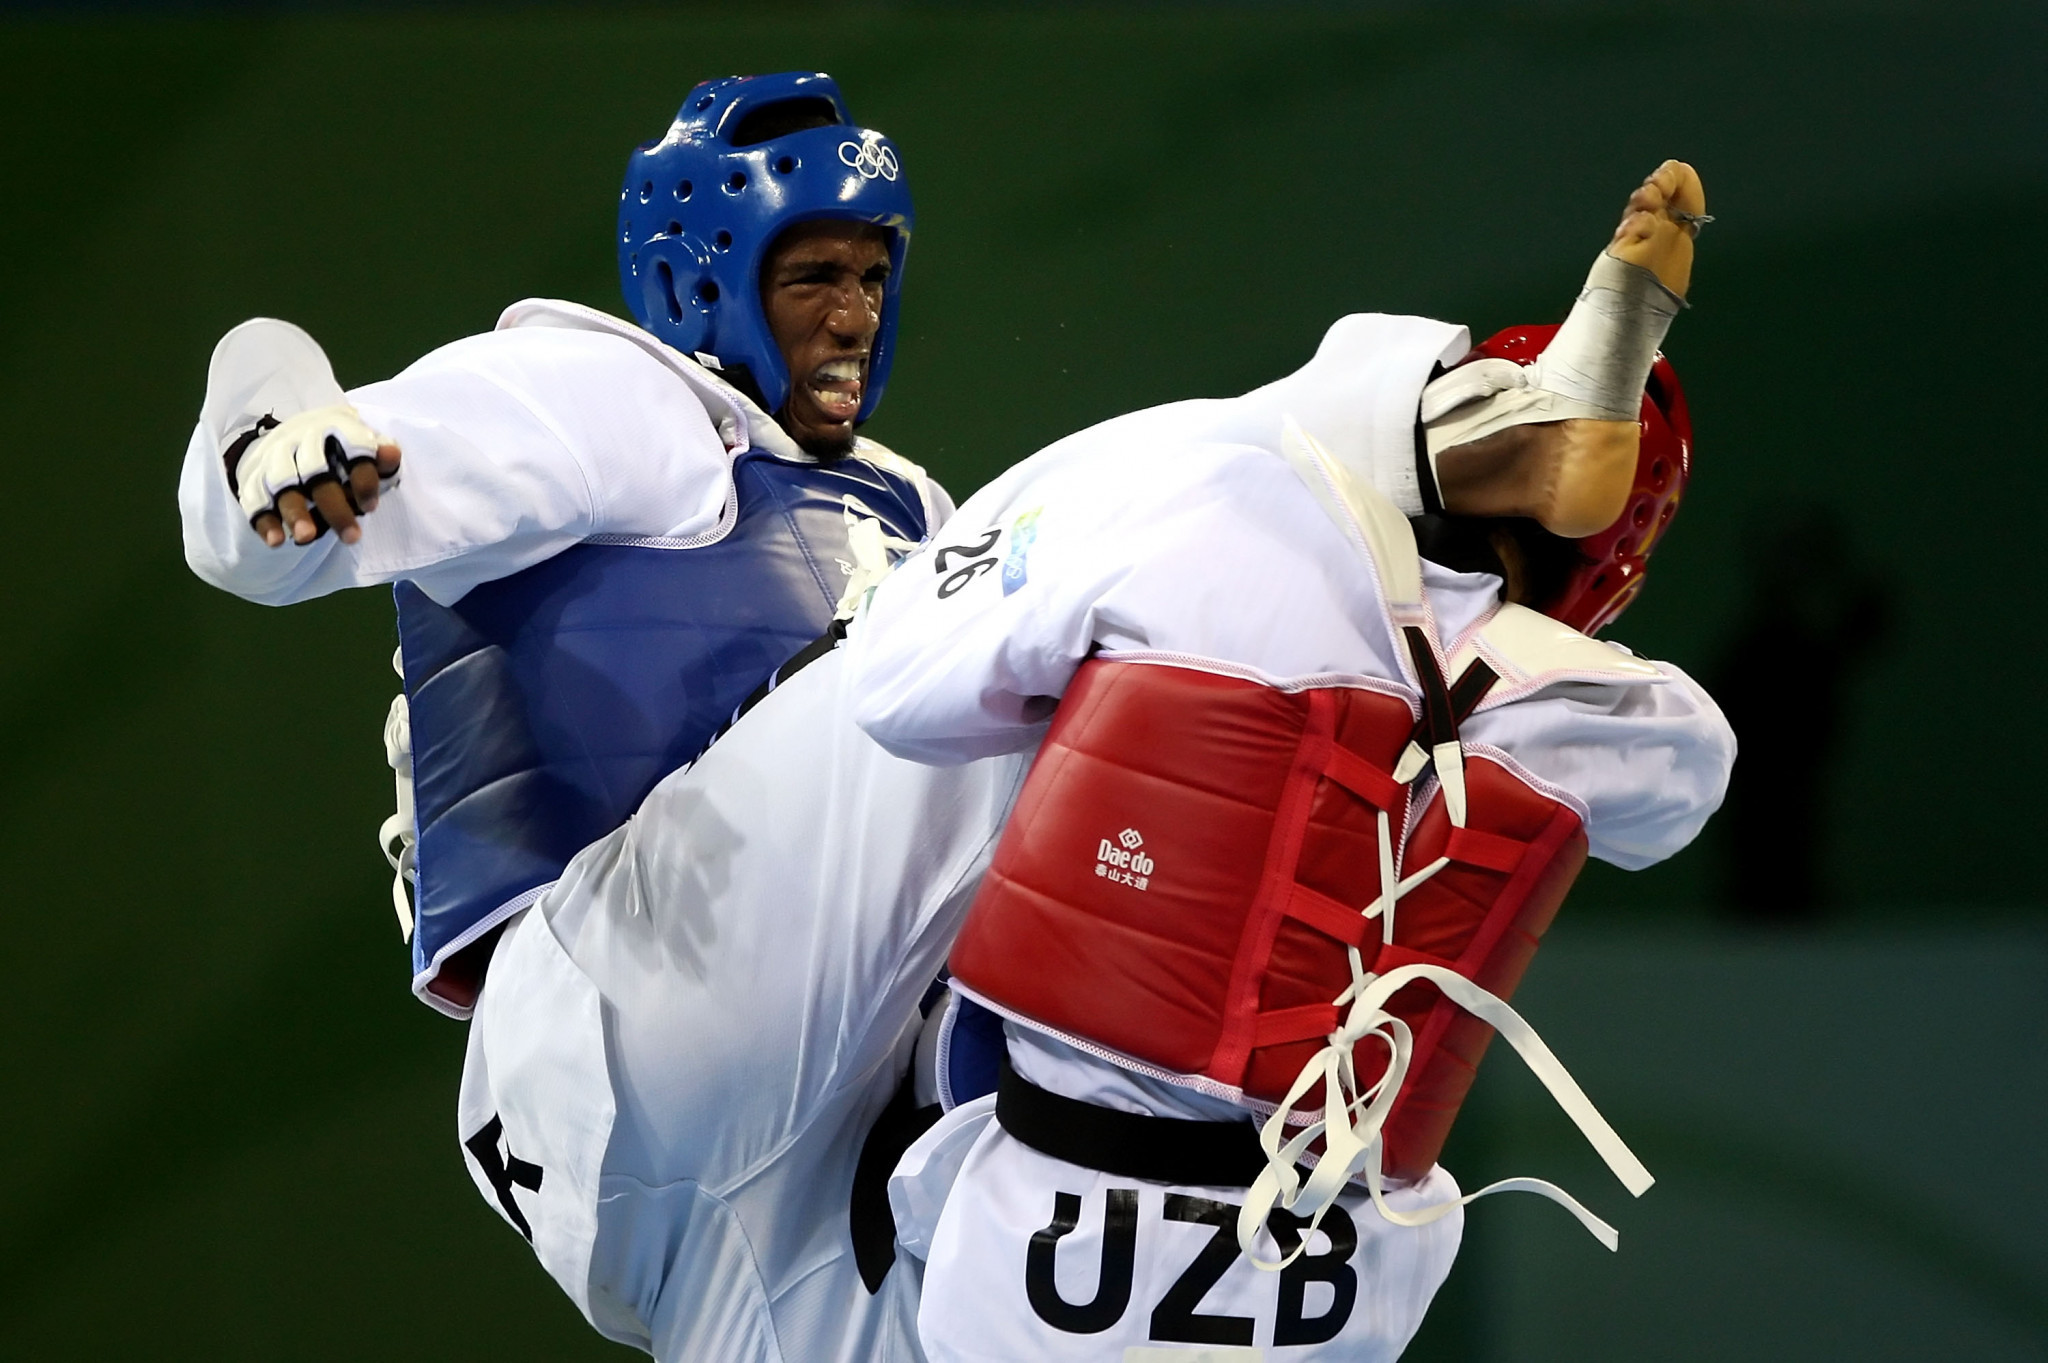 Chika Chukwumerije won Nigeria's first and so far only Olympic Taekwondo medal at Beijing 2008, where he took bronze, and is now the technical director of the Nigerian Taekwondo Federation ©Getty Images